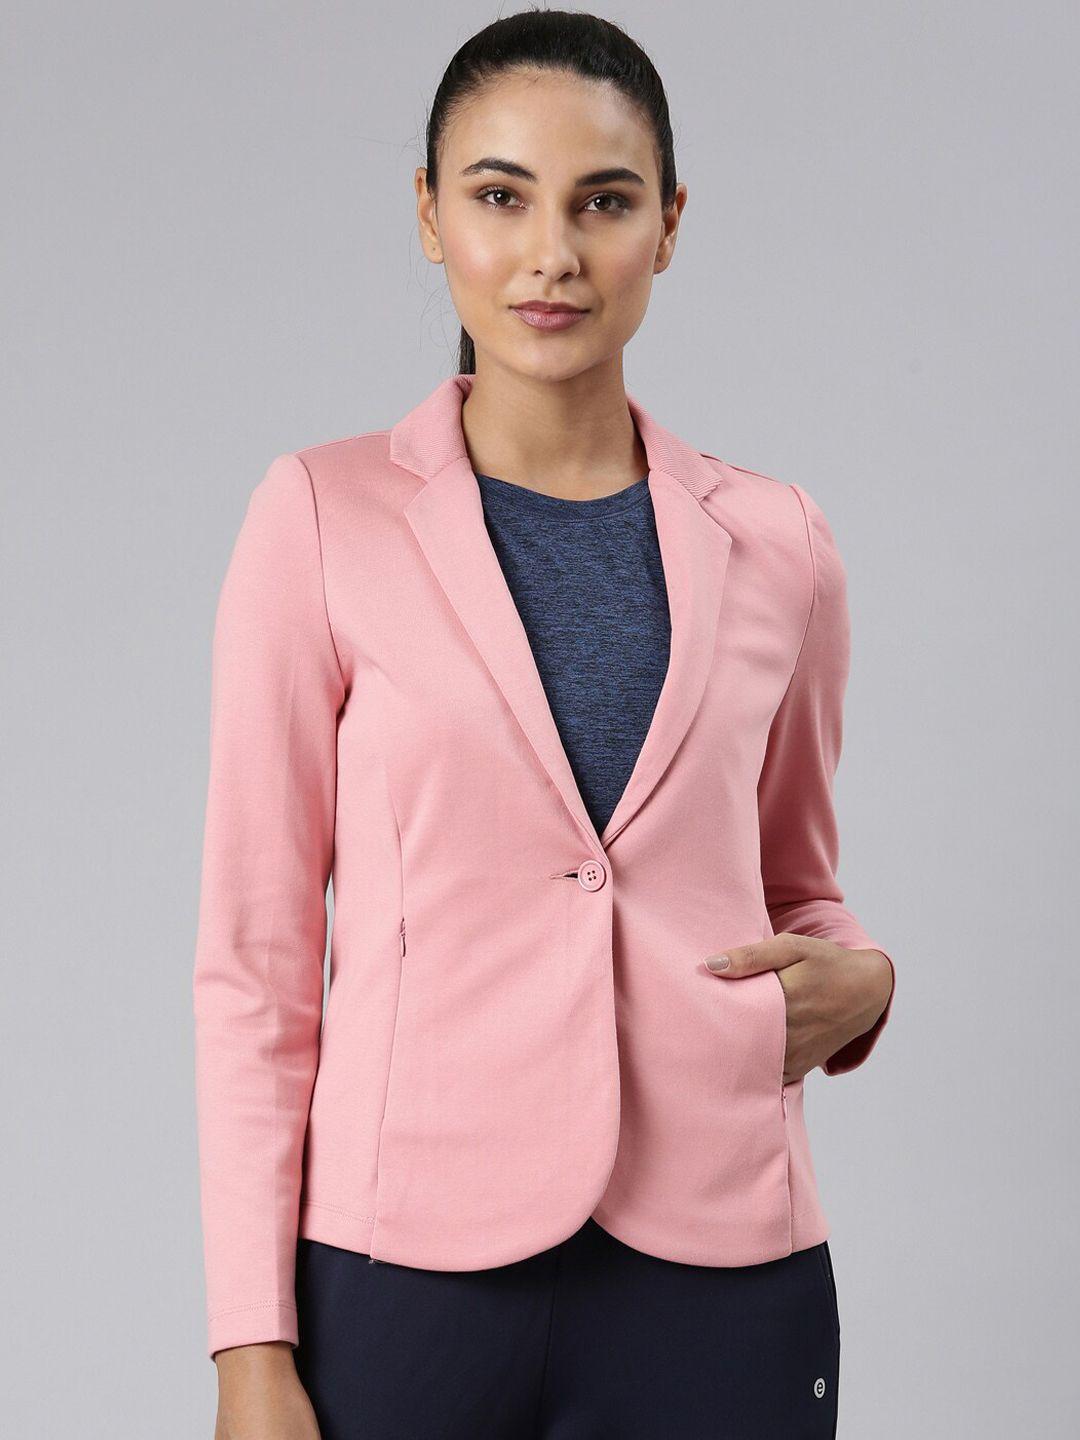 enamor dry fit cotton single breasted blazers